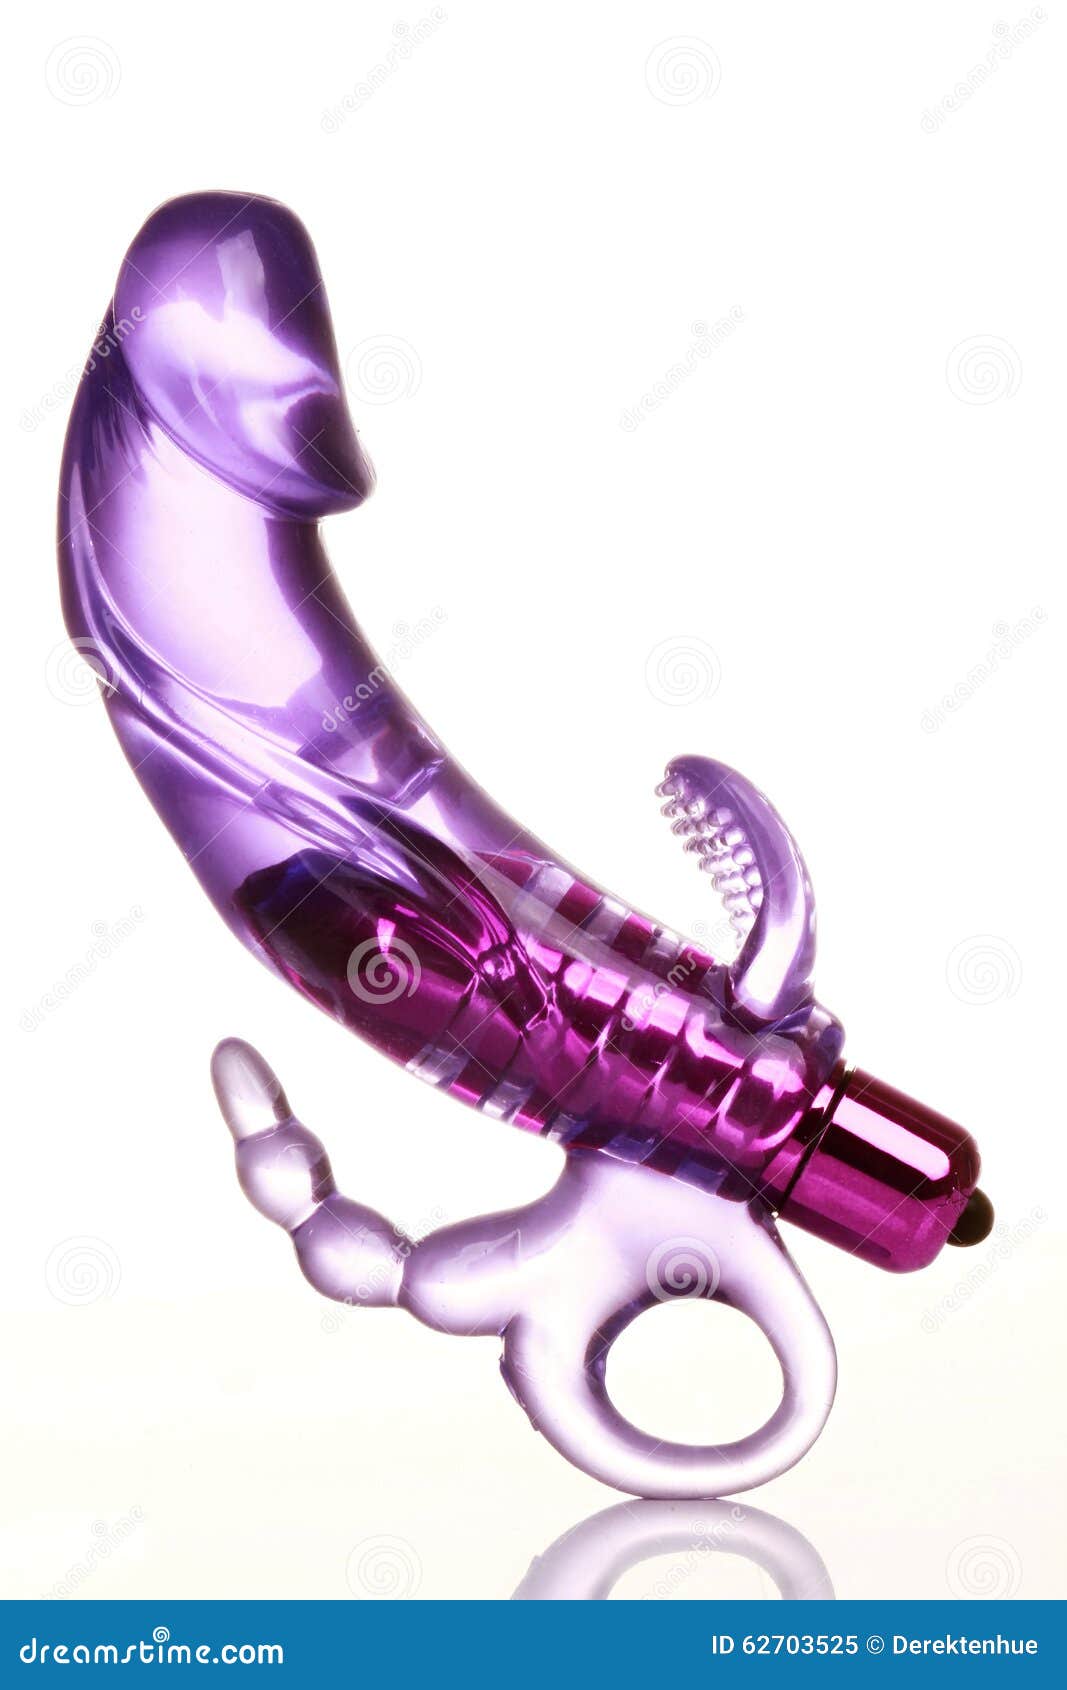 Photo about Image of a sex toy with white background. 